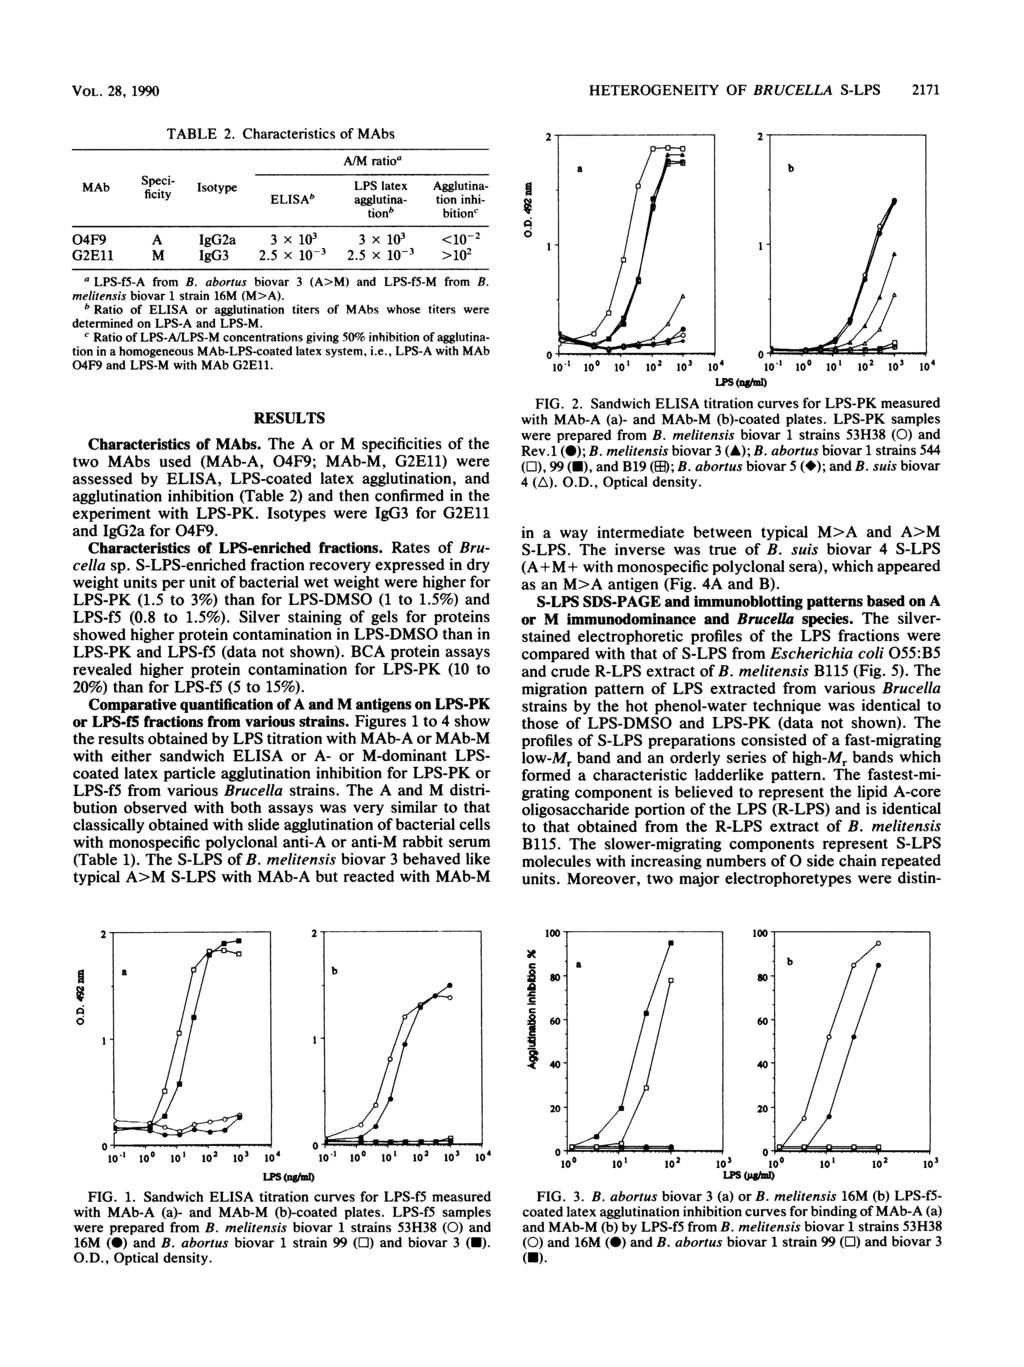 VOL. 28, 1990 TABLE 2. Characteristics of MAbs A/M ratioa MAb Specificity Isotype ELISAb LPS agglutinalatex Agglutina- tion inhitionb bitionc 04F9 A IgG2a 3 x 103 3 x 103 <10-2 G2E11 M IgG3 2.